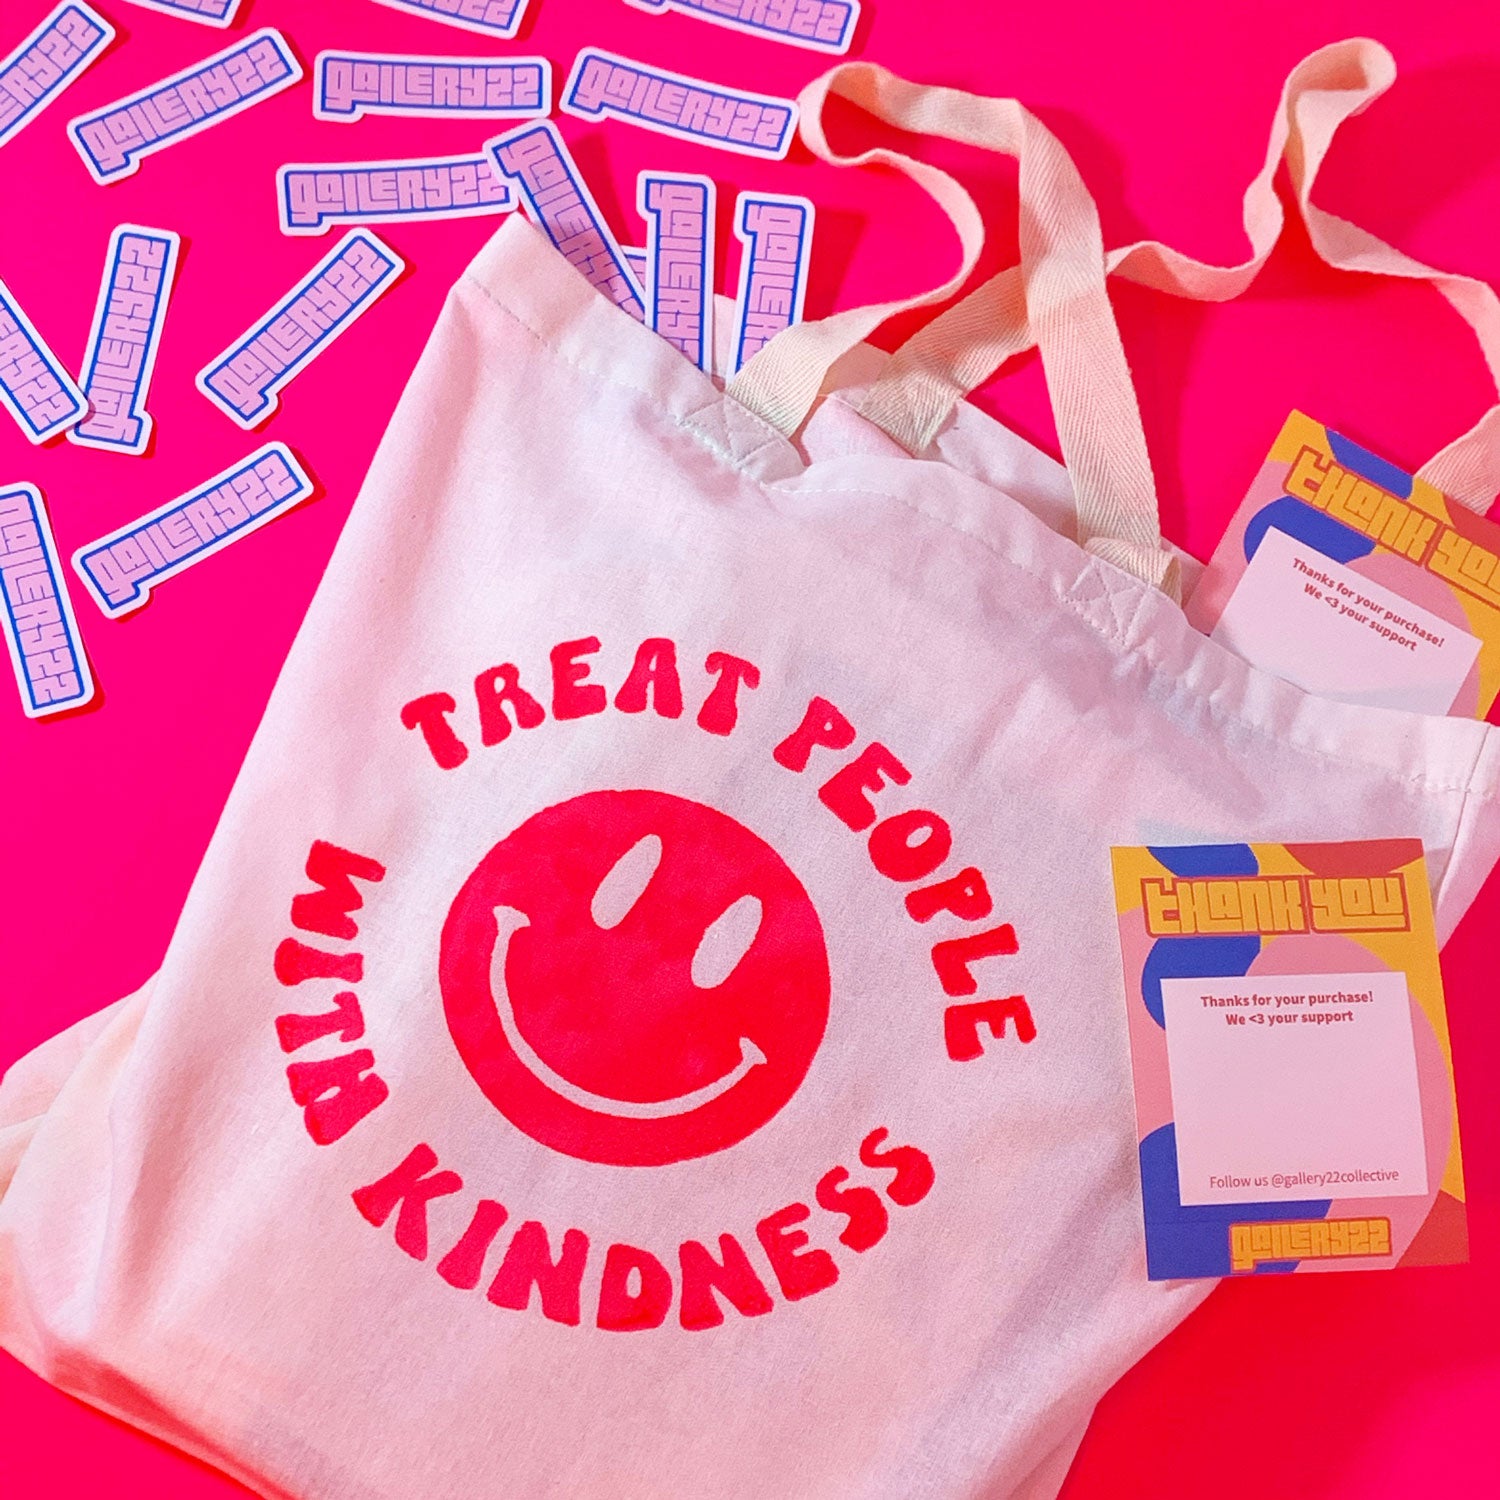 Gallery 22 Treat People with Kindness Tote Bag - Off-White/Fluorescent Pink